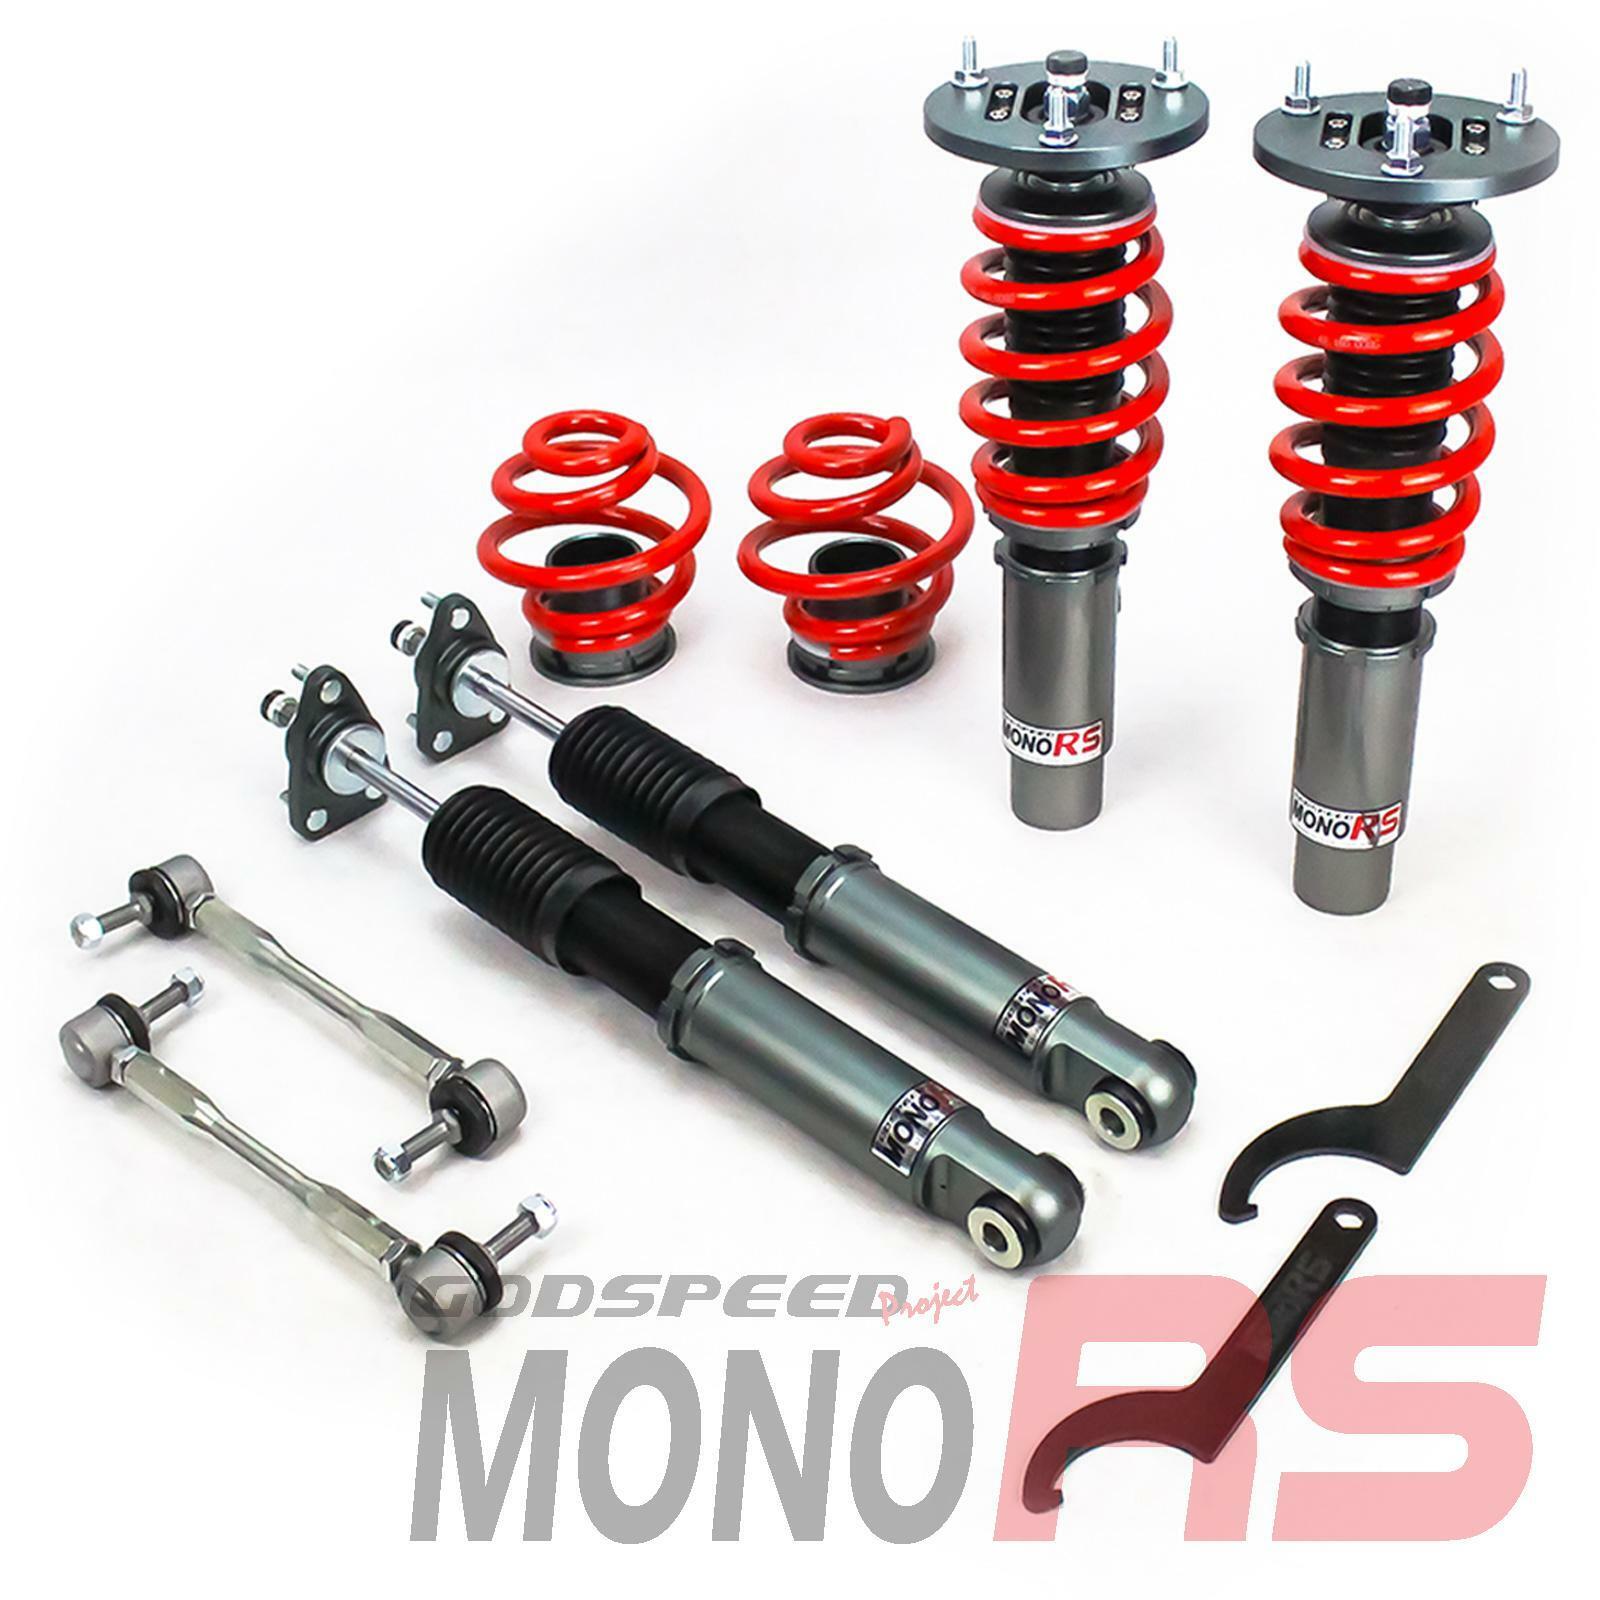 Godspeed(MRS1413) MonoRS Coilovers for BMW Z4(E89) 09-16, Fully Adjustable